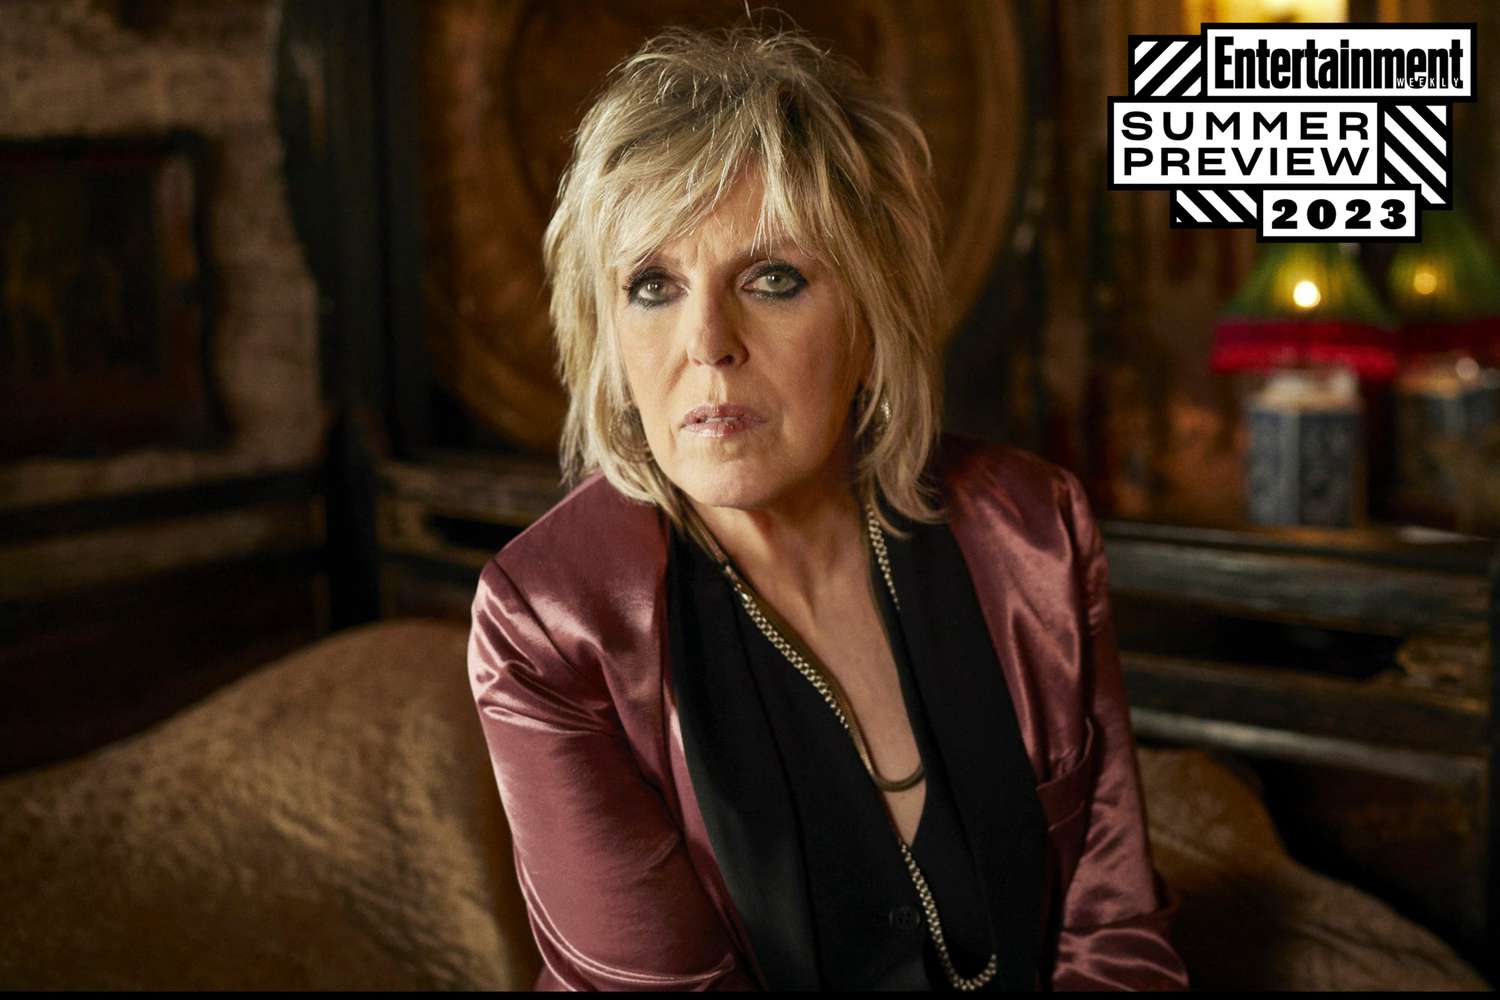 Lucinda Williams' Stories From a Rock n Roll Heart